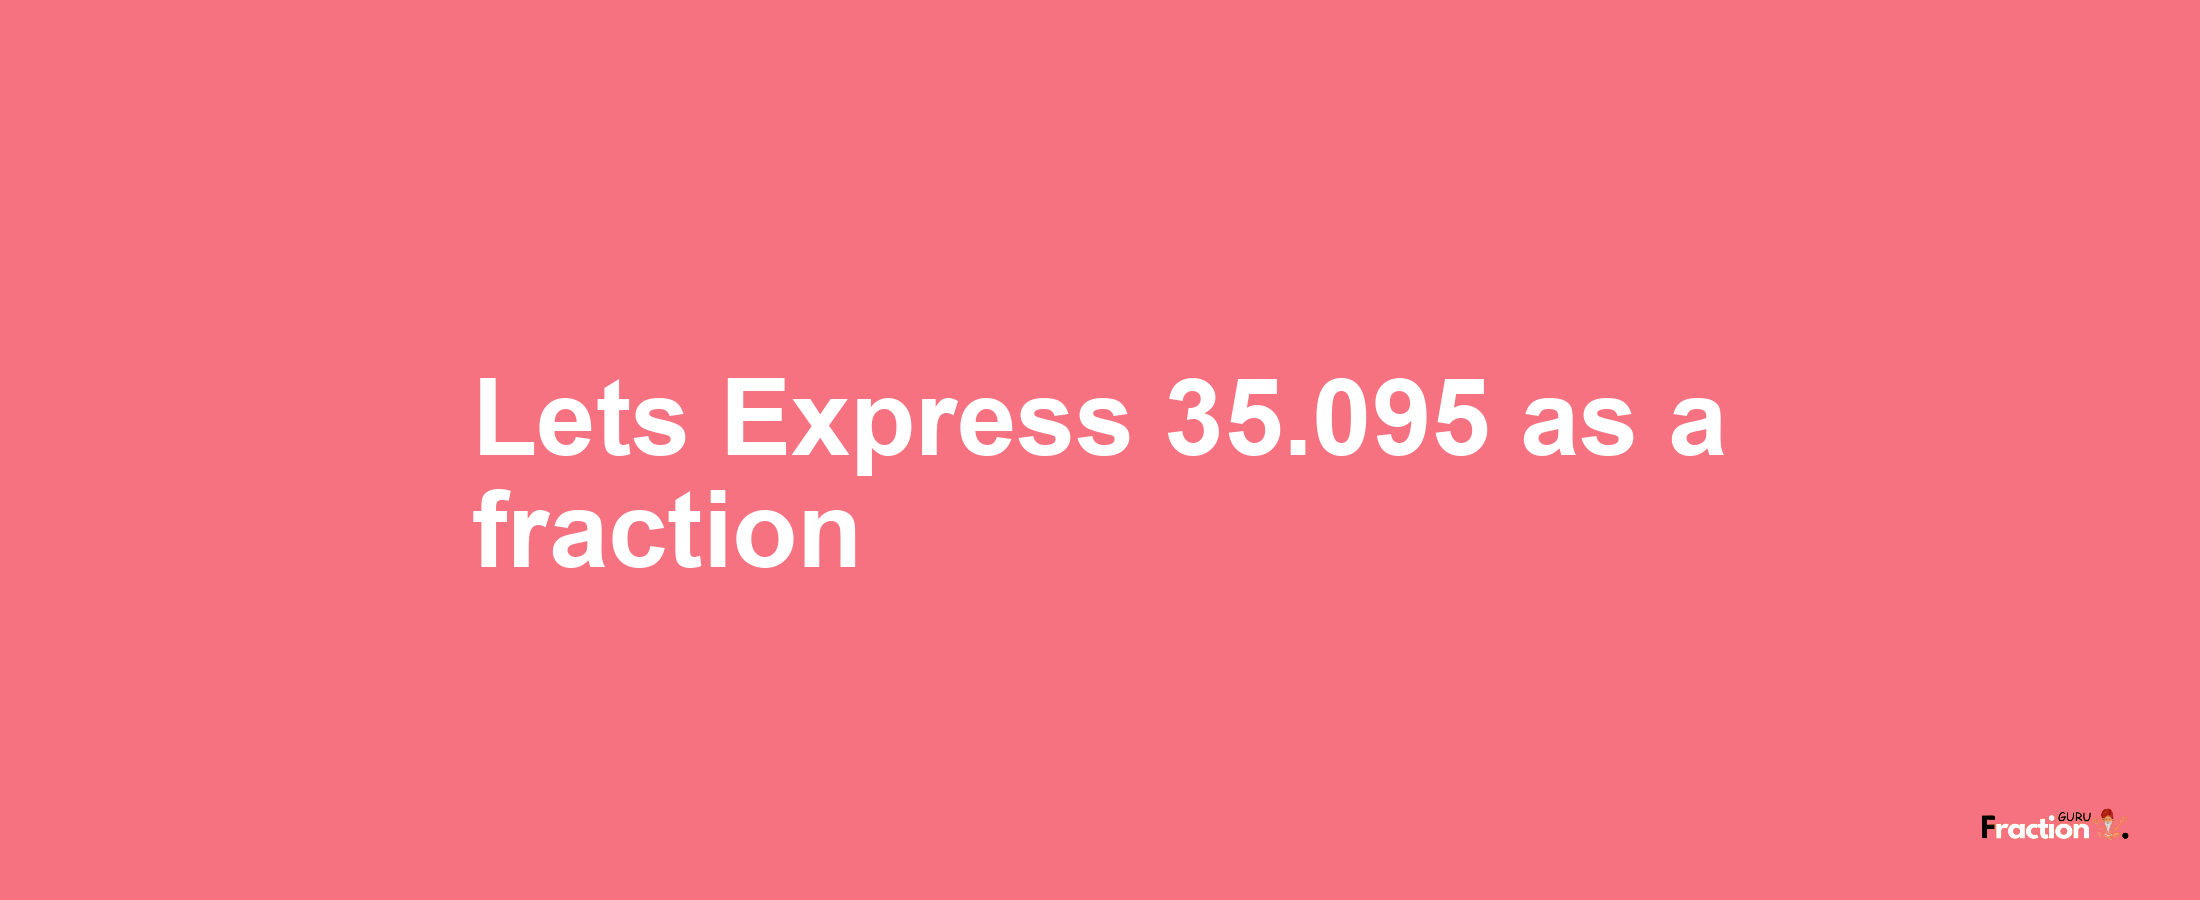 Lets Express 35.095 as afraction